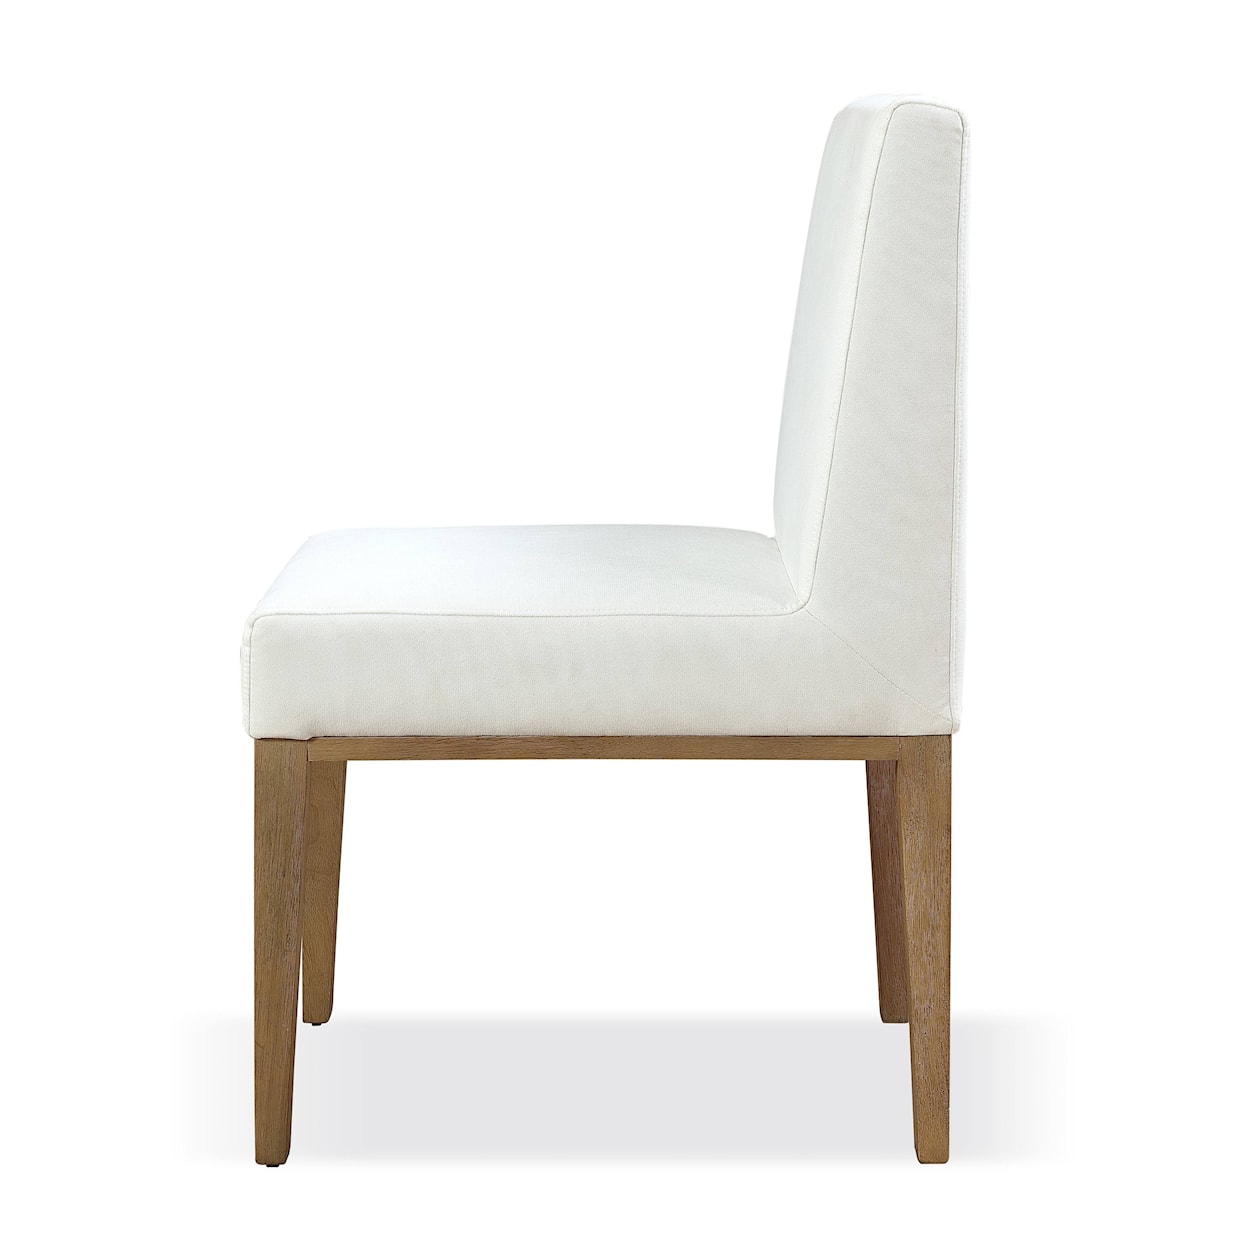 Modus International One Side Chair - Pearl/Bisque